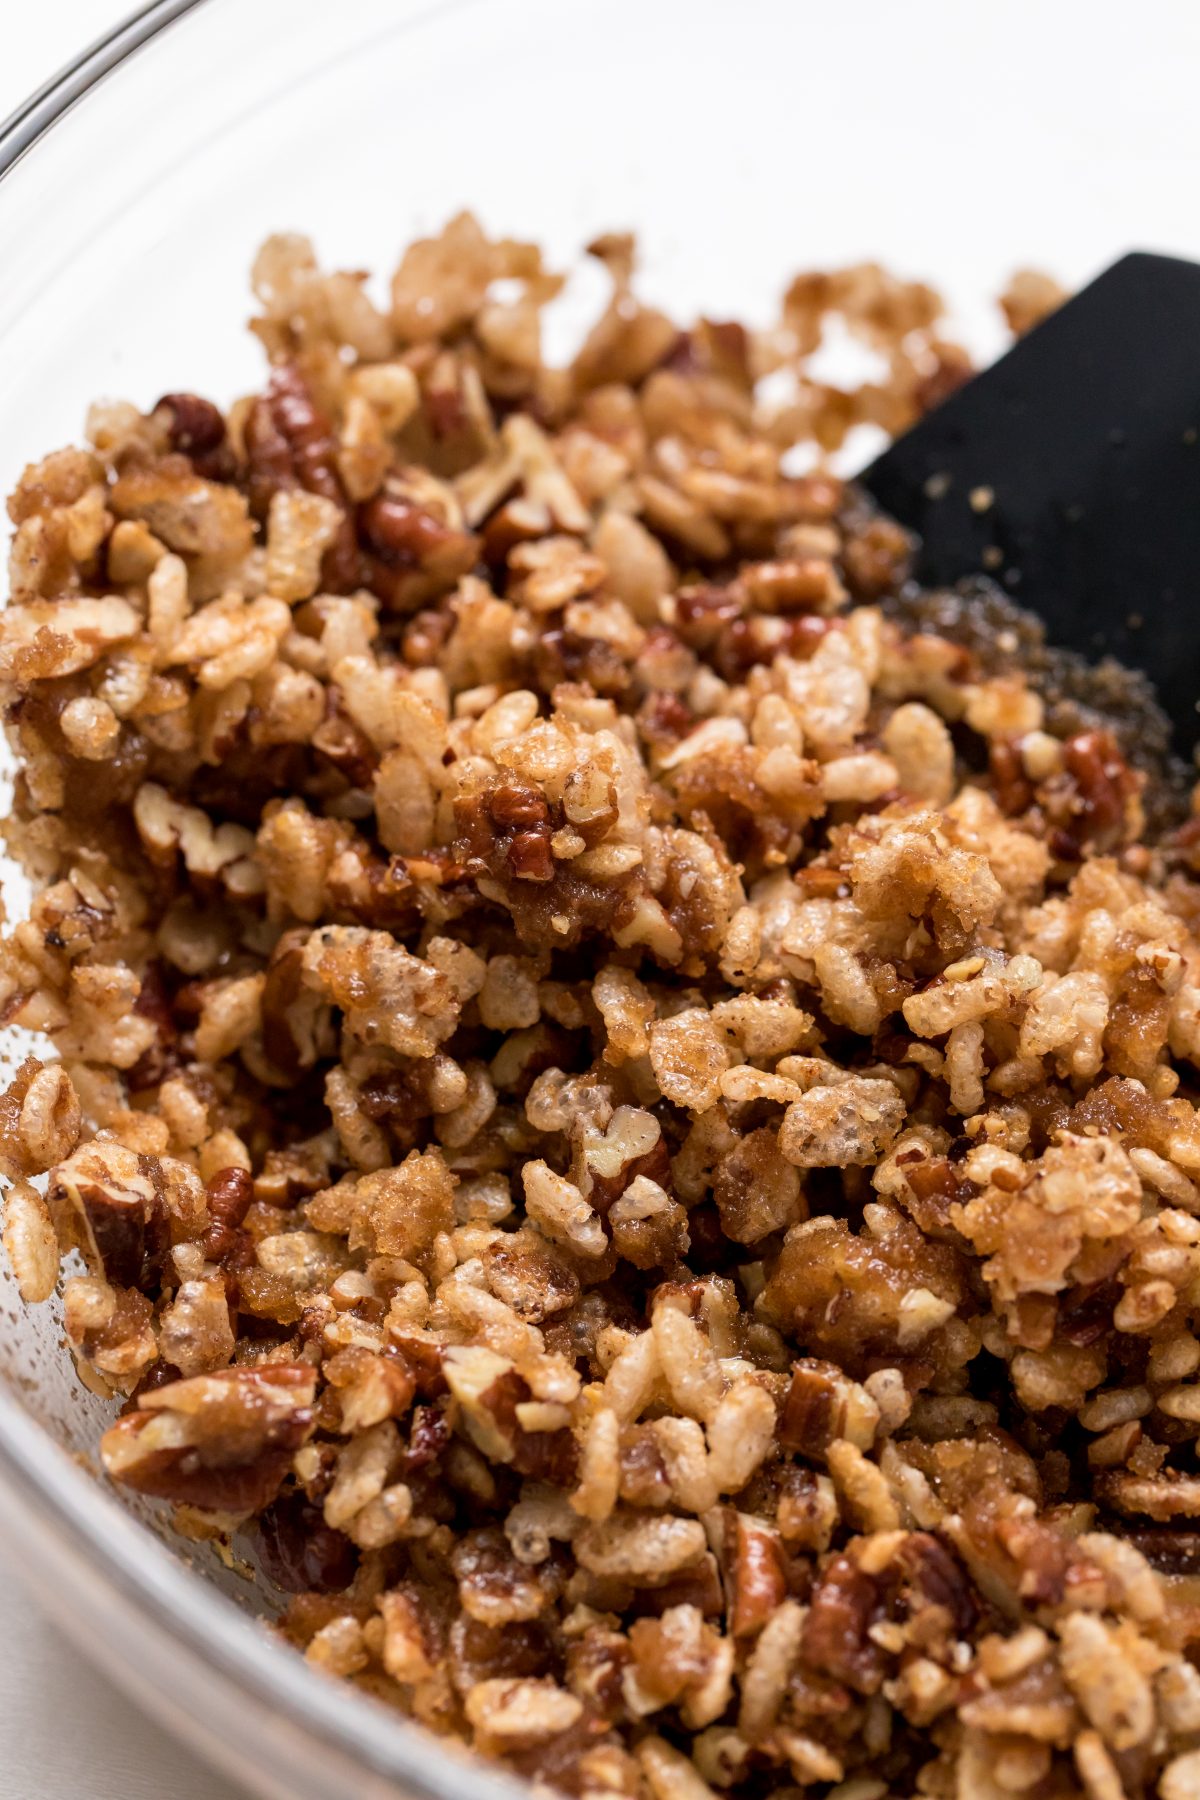 5D4B5600 - Sweet Potato Casserole with Pecan Topping - Prepare the pecan topping